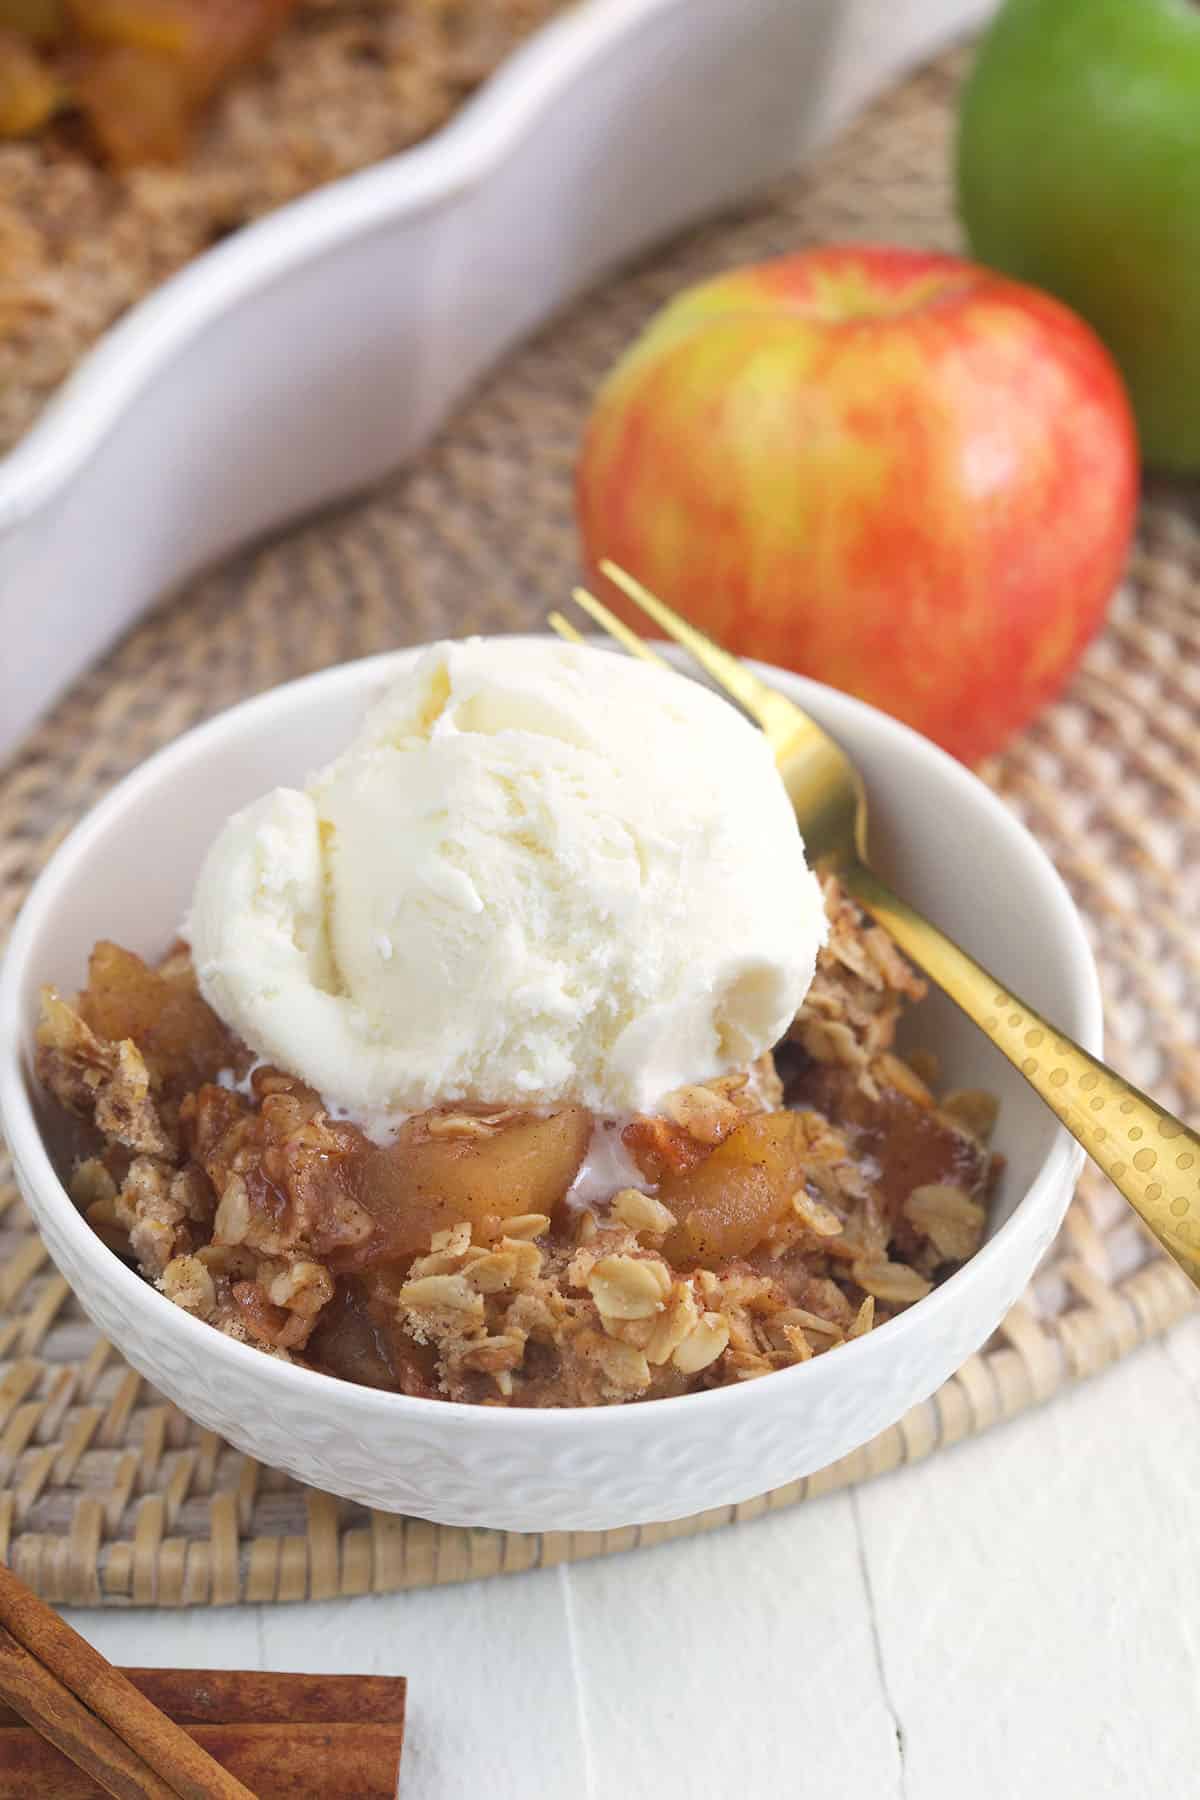 A scoop of vanilla ice cream is placed on top of a serving of apple crisp. 